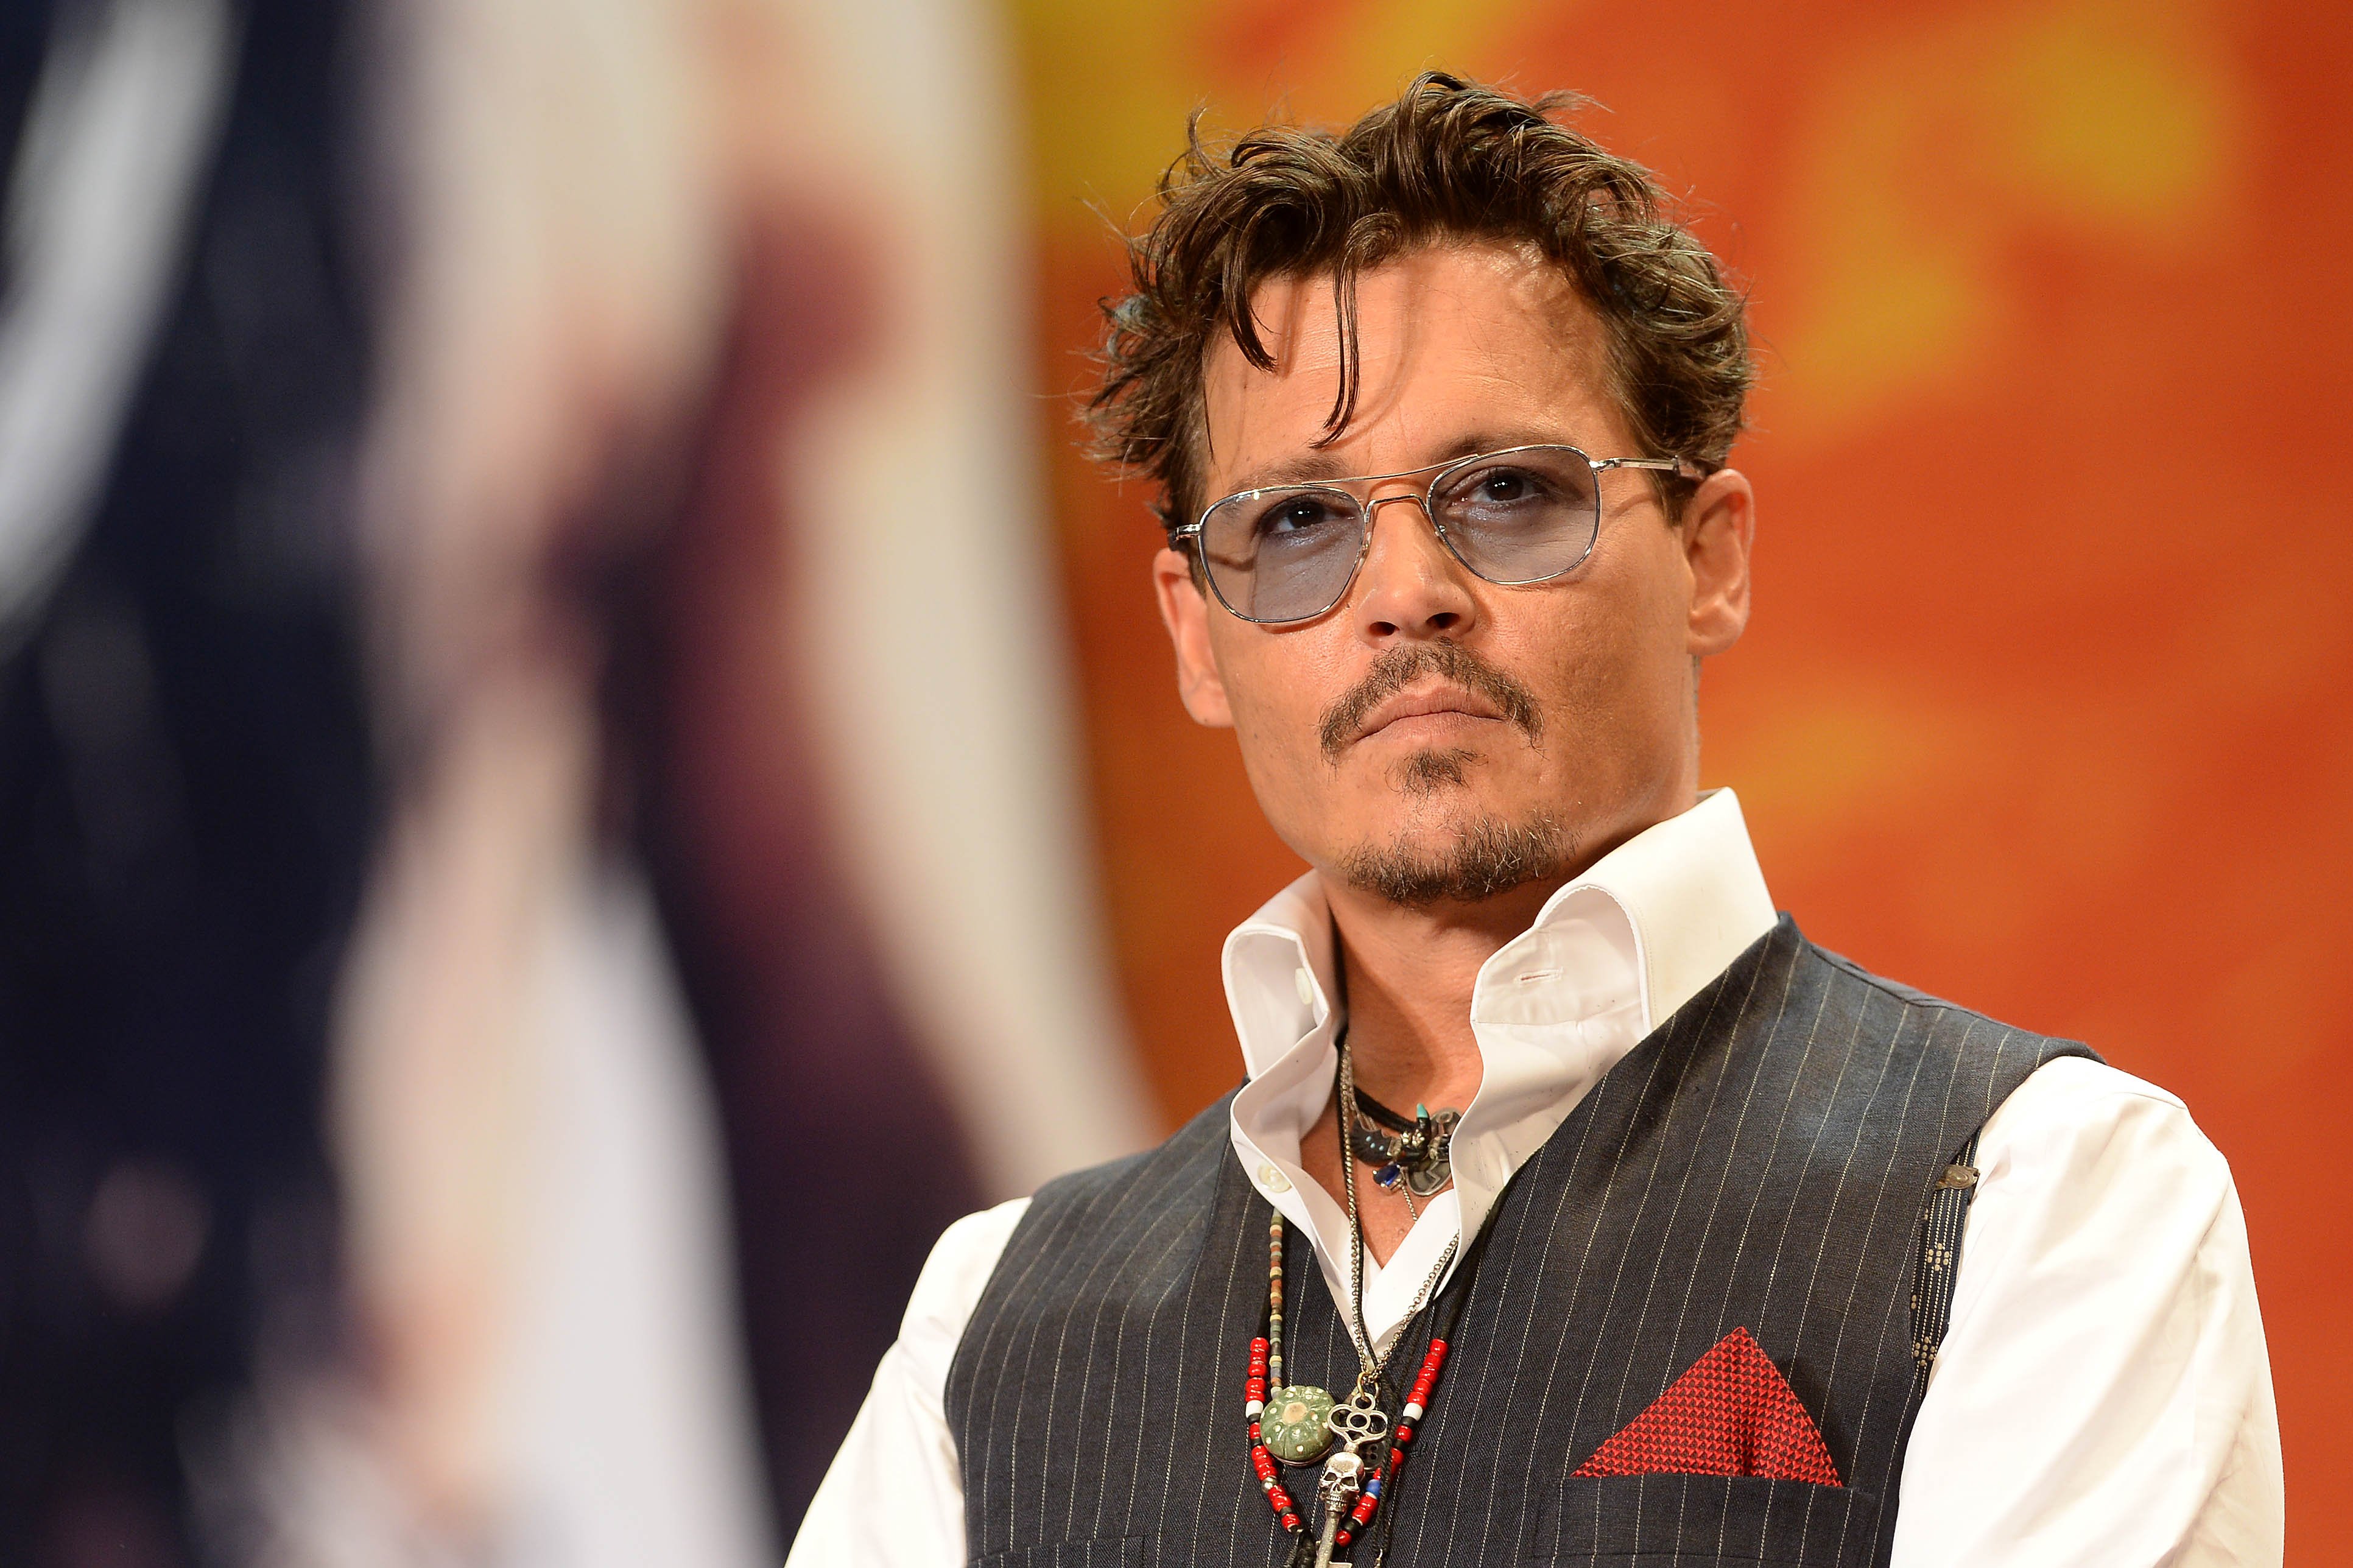 Johnny Depp at the "Lone Ranger" premiere at Roppongi Hills on July 17, 2013 in Tokyo. | Source: Getty Images